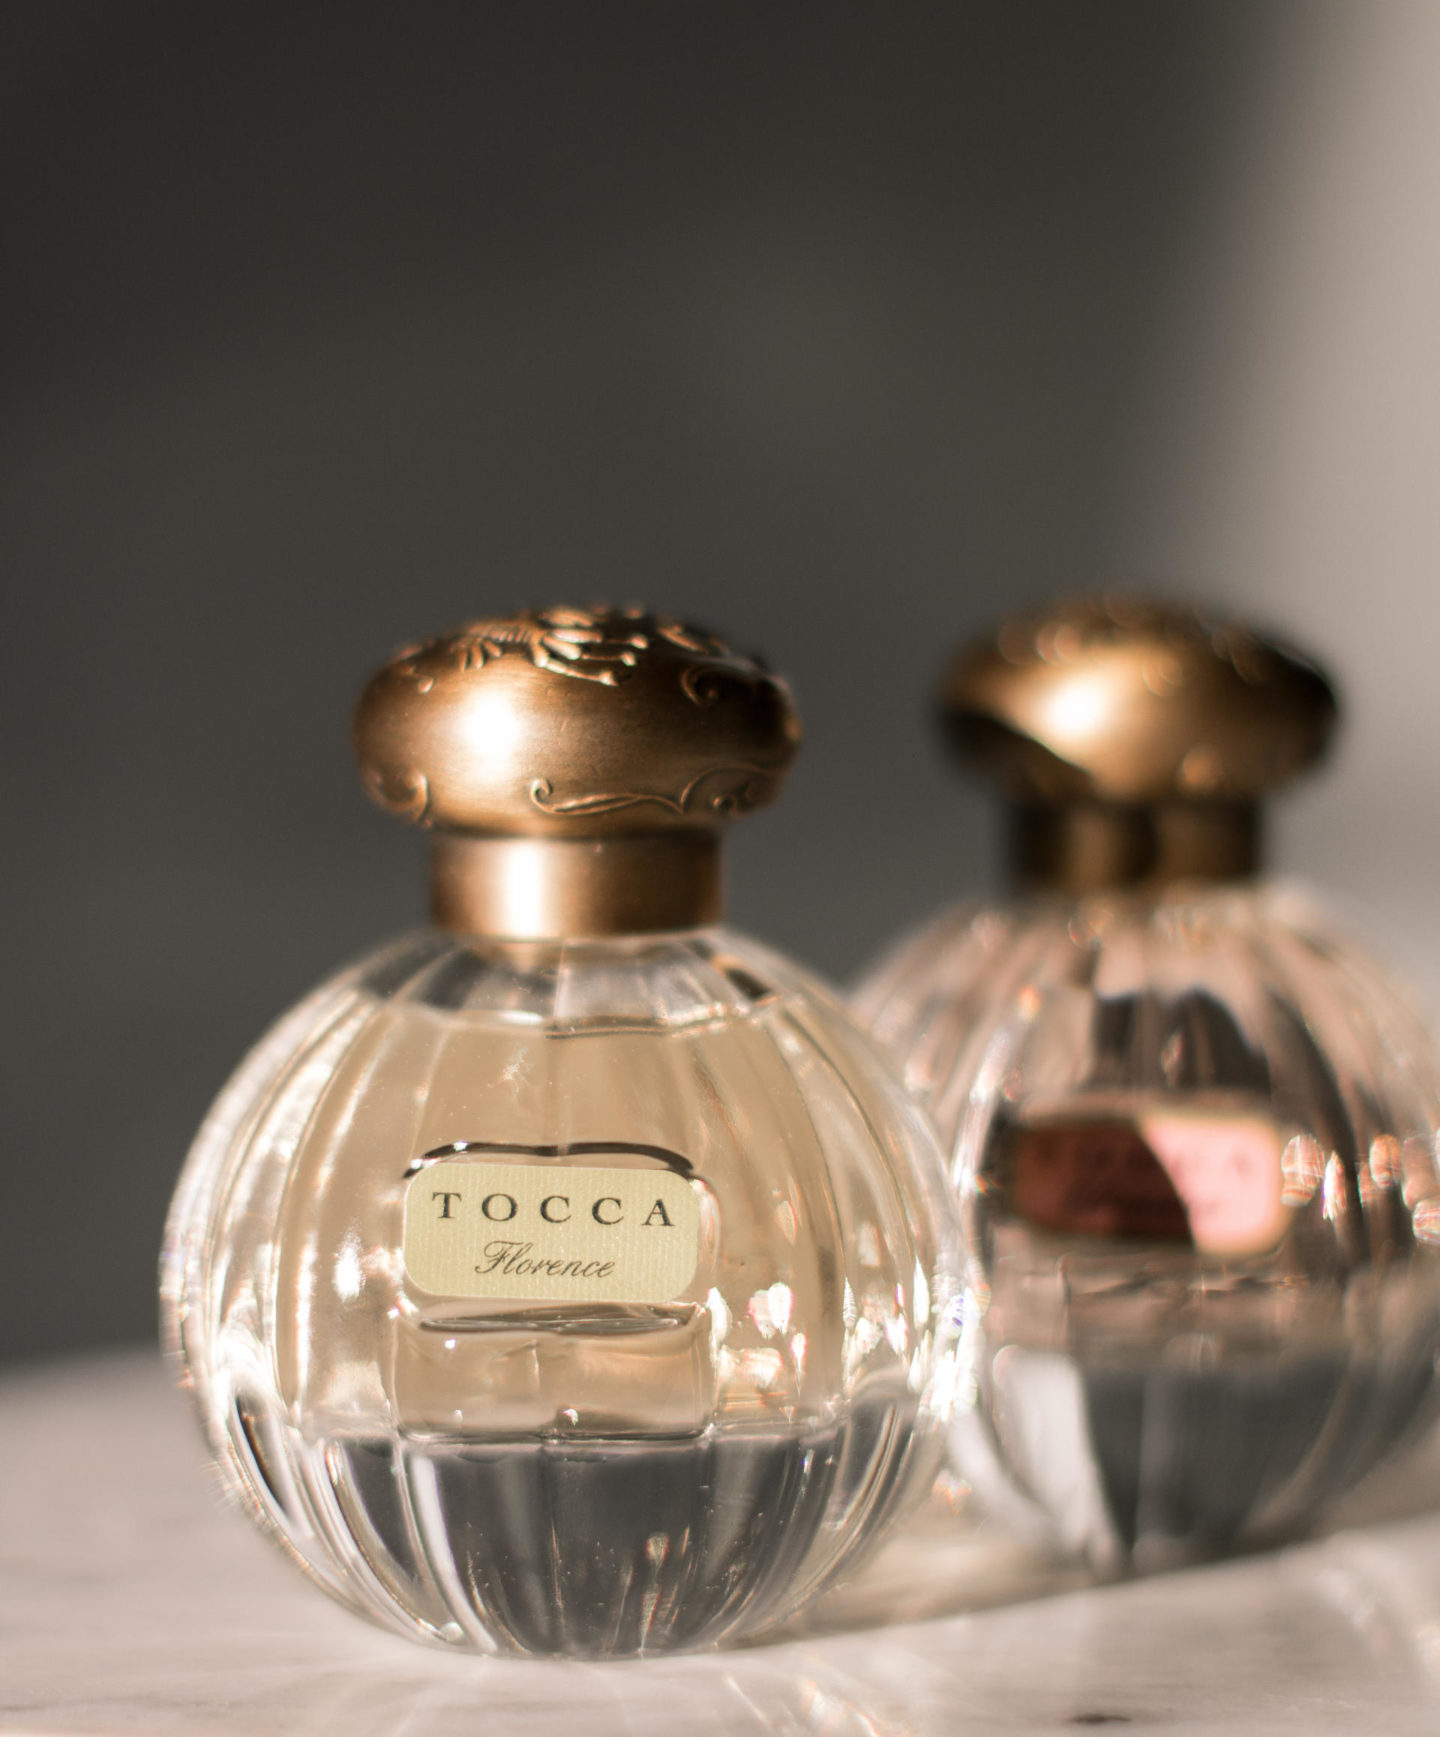 Tocca Florence Perfume on a vanity